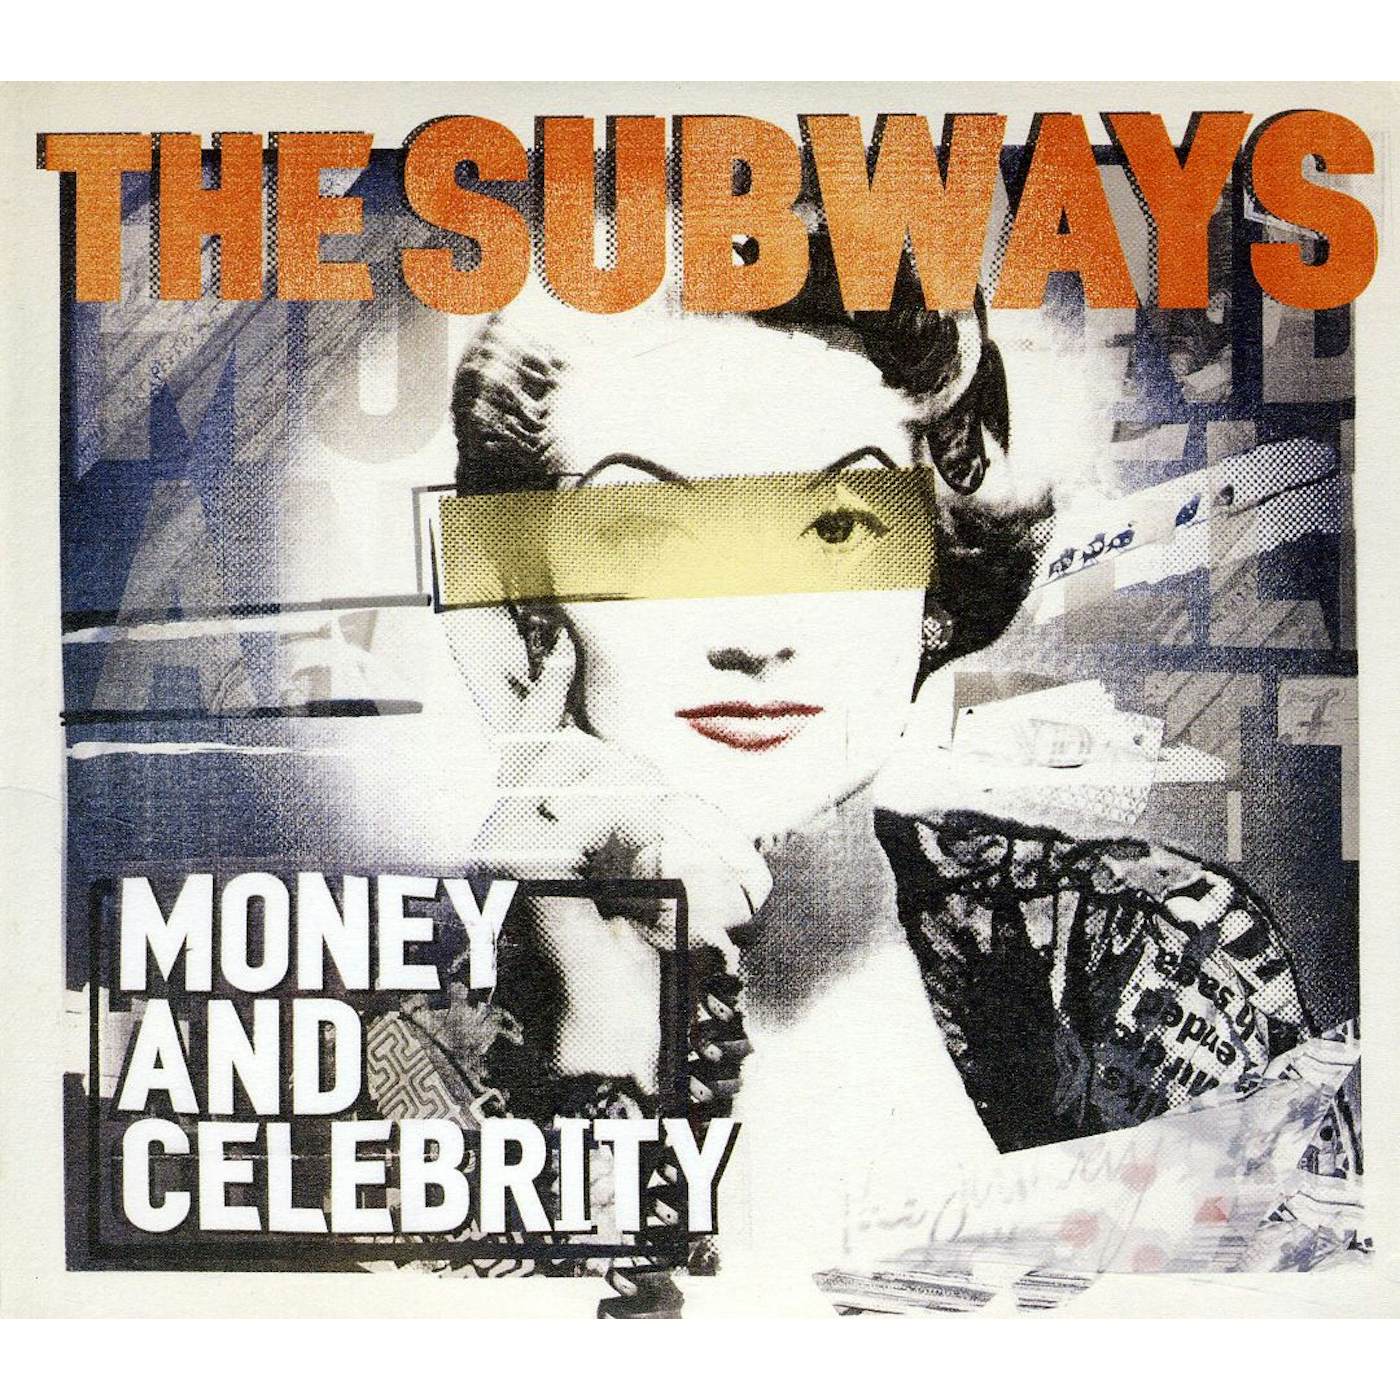 The Subways MONEY & CELEBRITY: SPECIAL EDITION CD